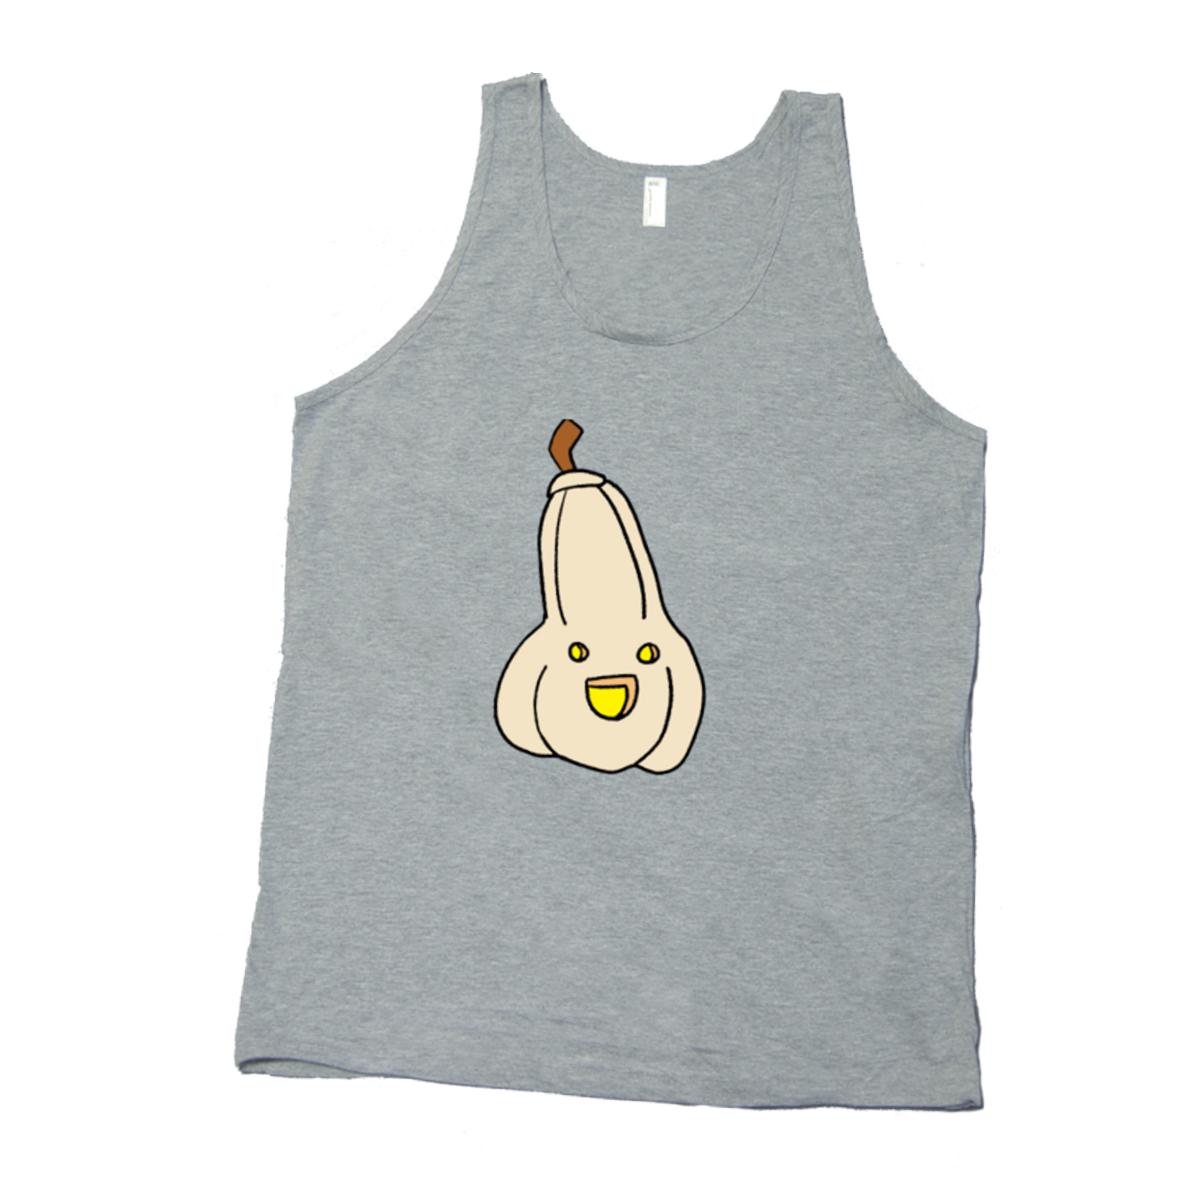 The New Guy Unisex Tank Top Small heather-grey